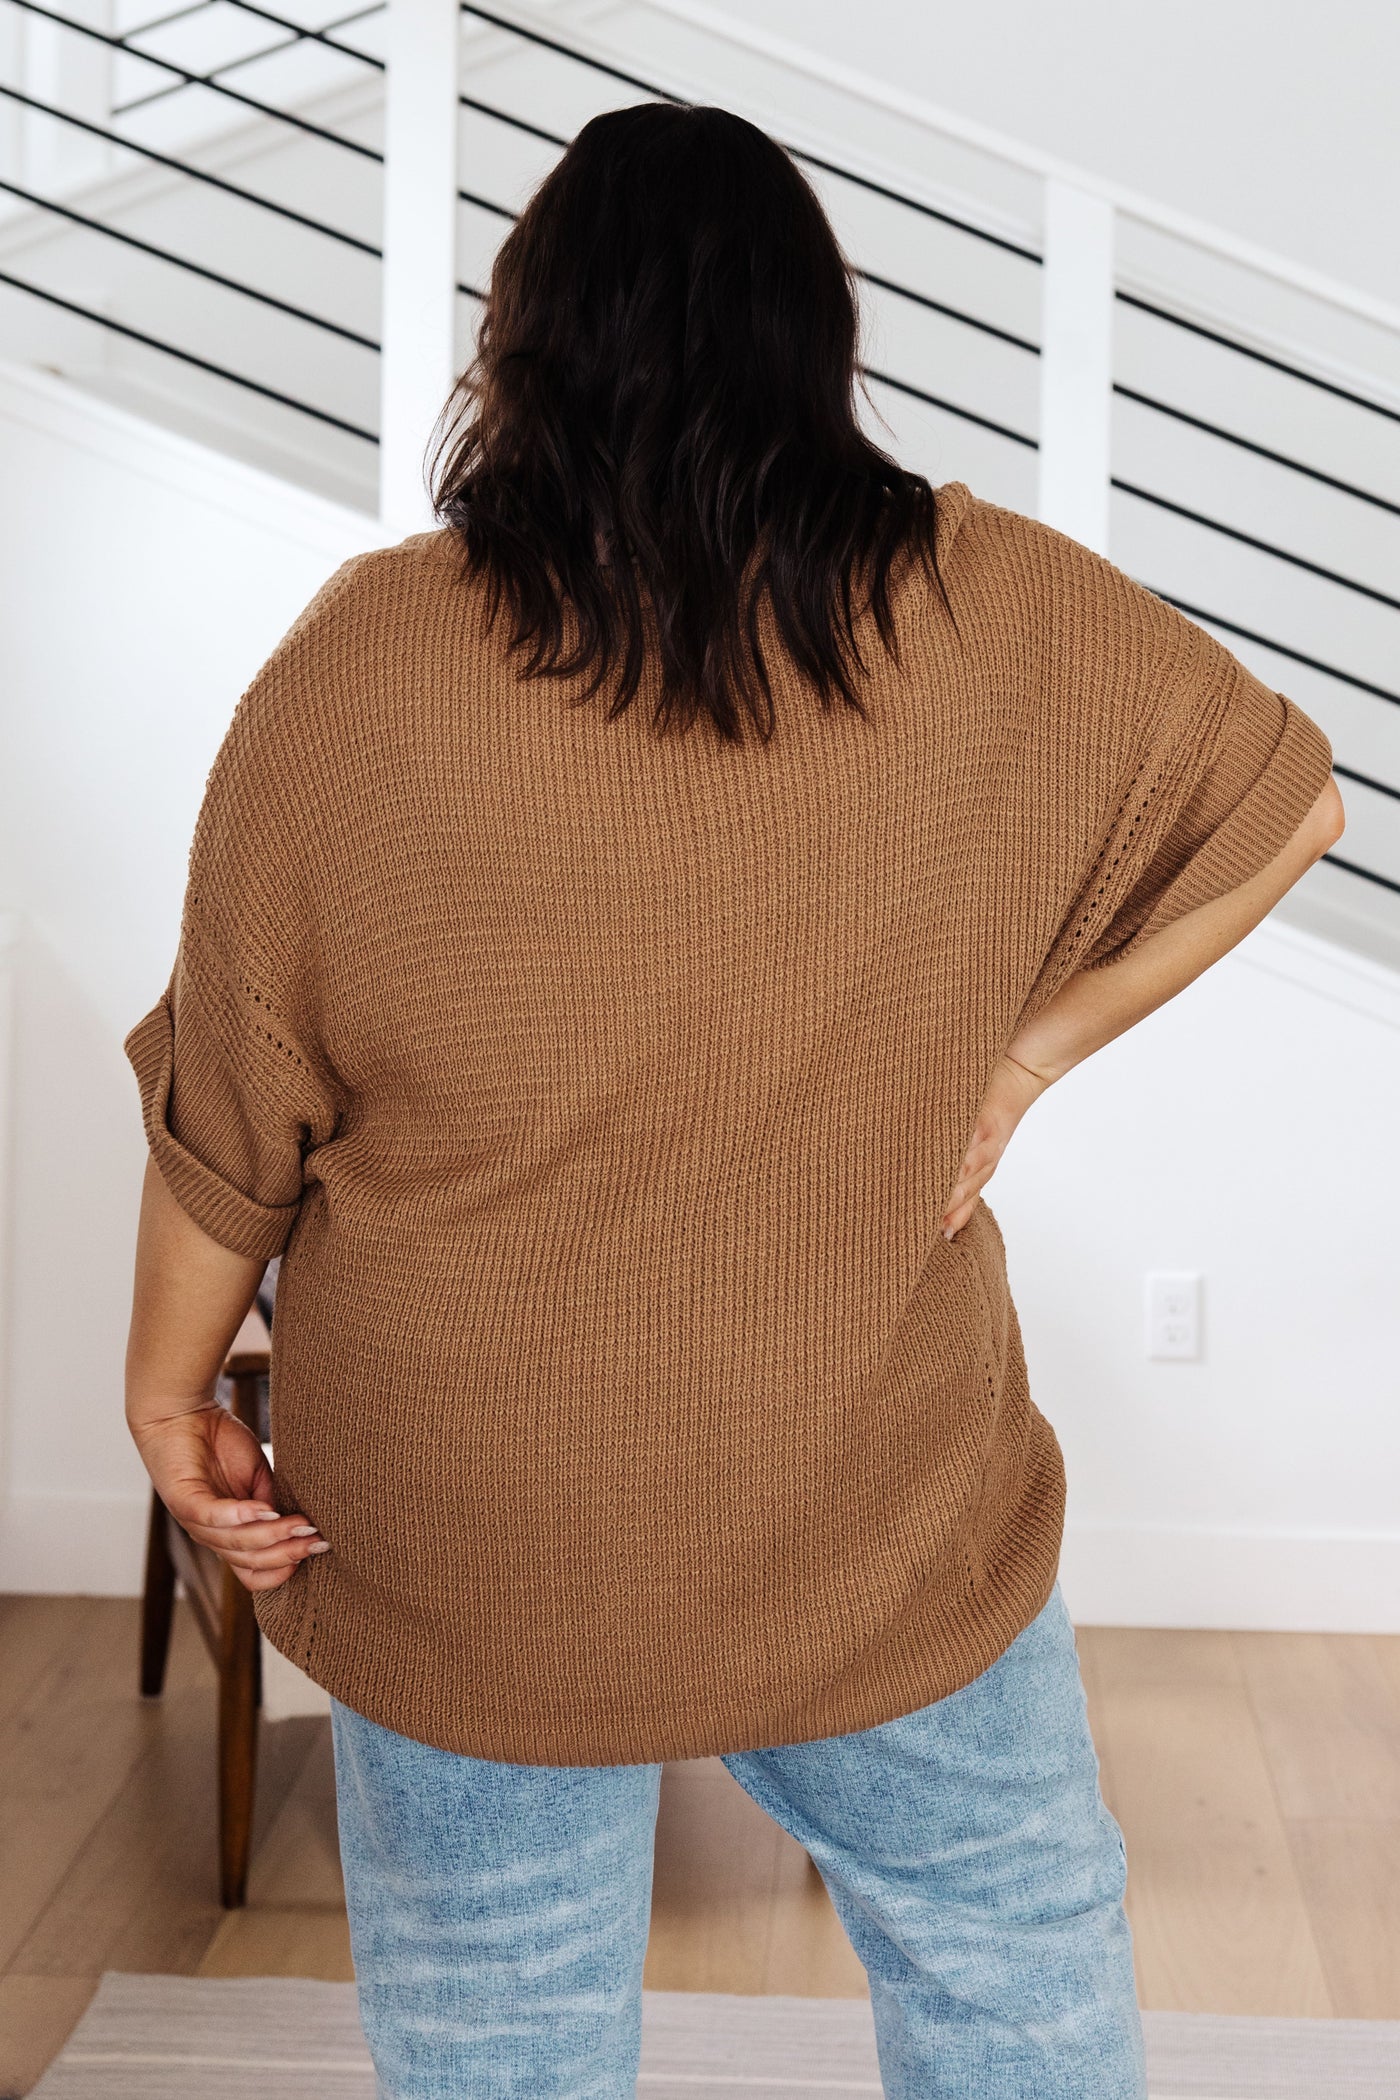 Its lightweight knit fabric, v-neckline, and cuffed short sleeves make it perfect for chillier days. Look great while feeling cozy any time of the year.